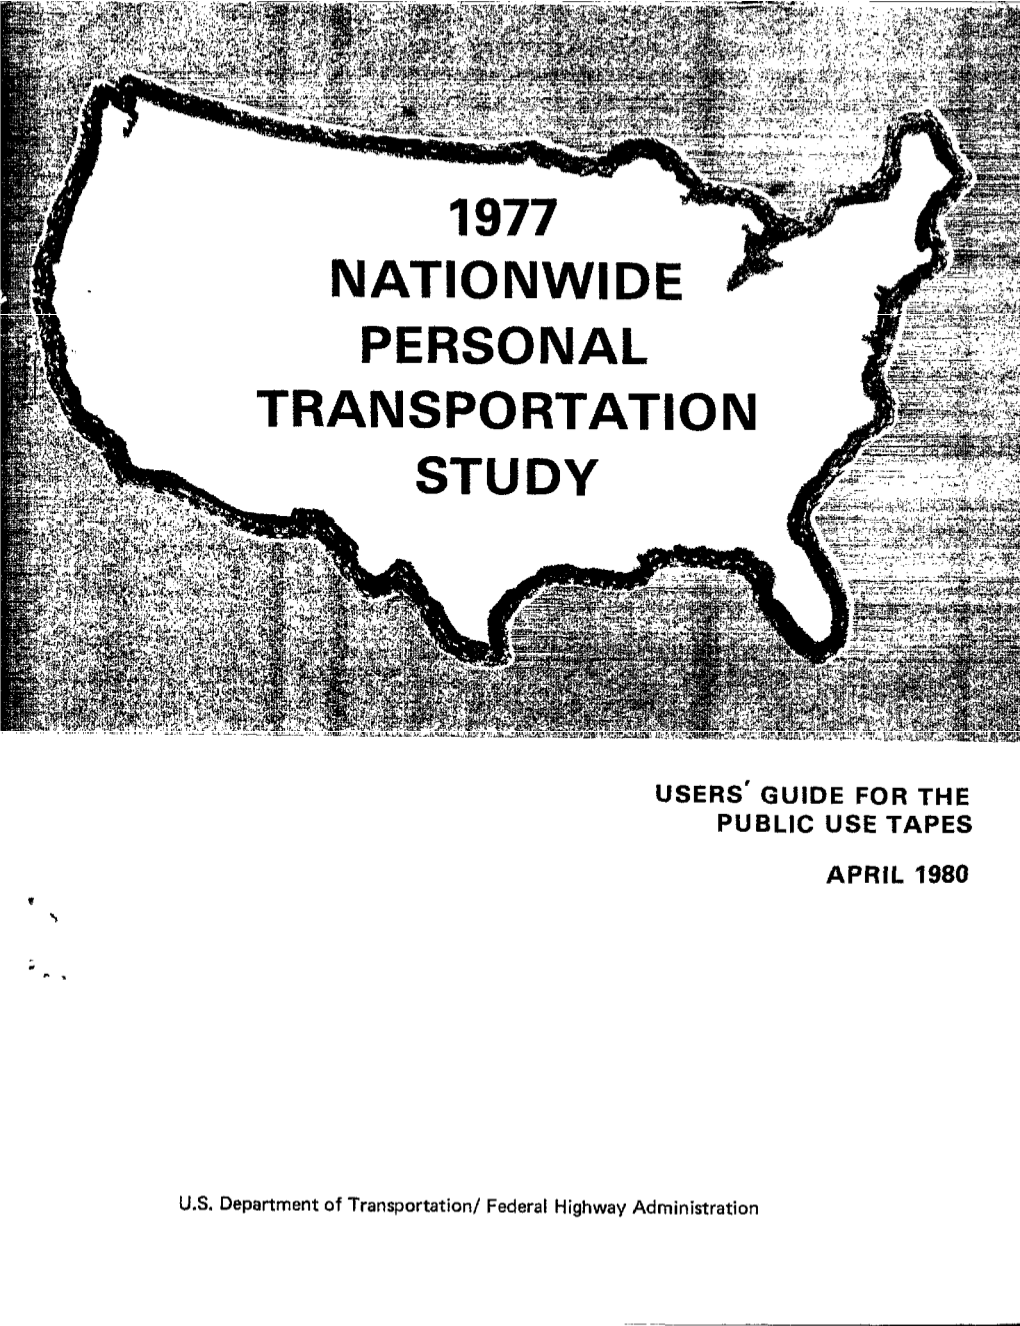 Users' Guide for the Public Use Tapes April 1980